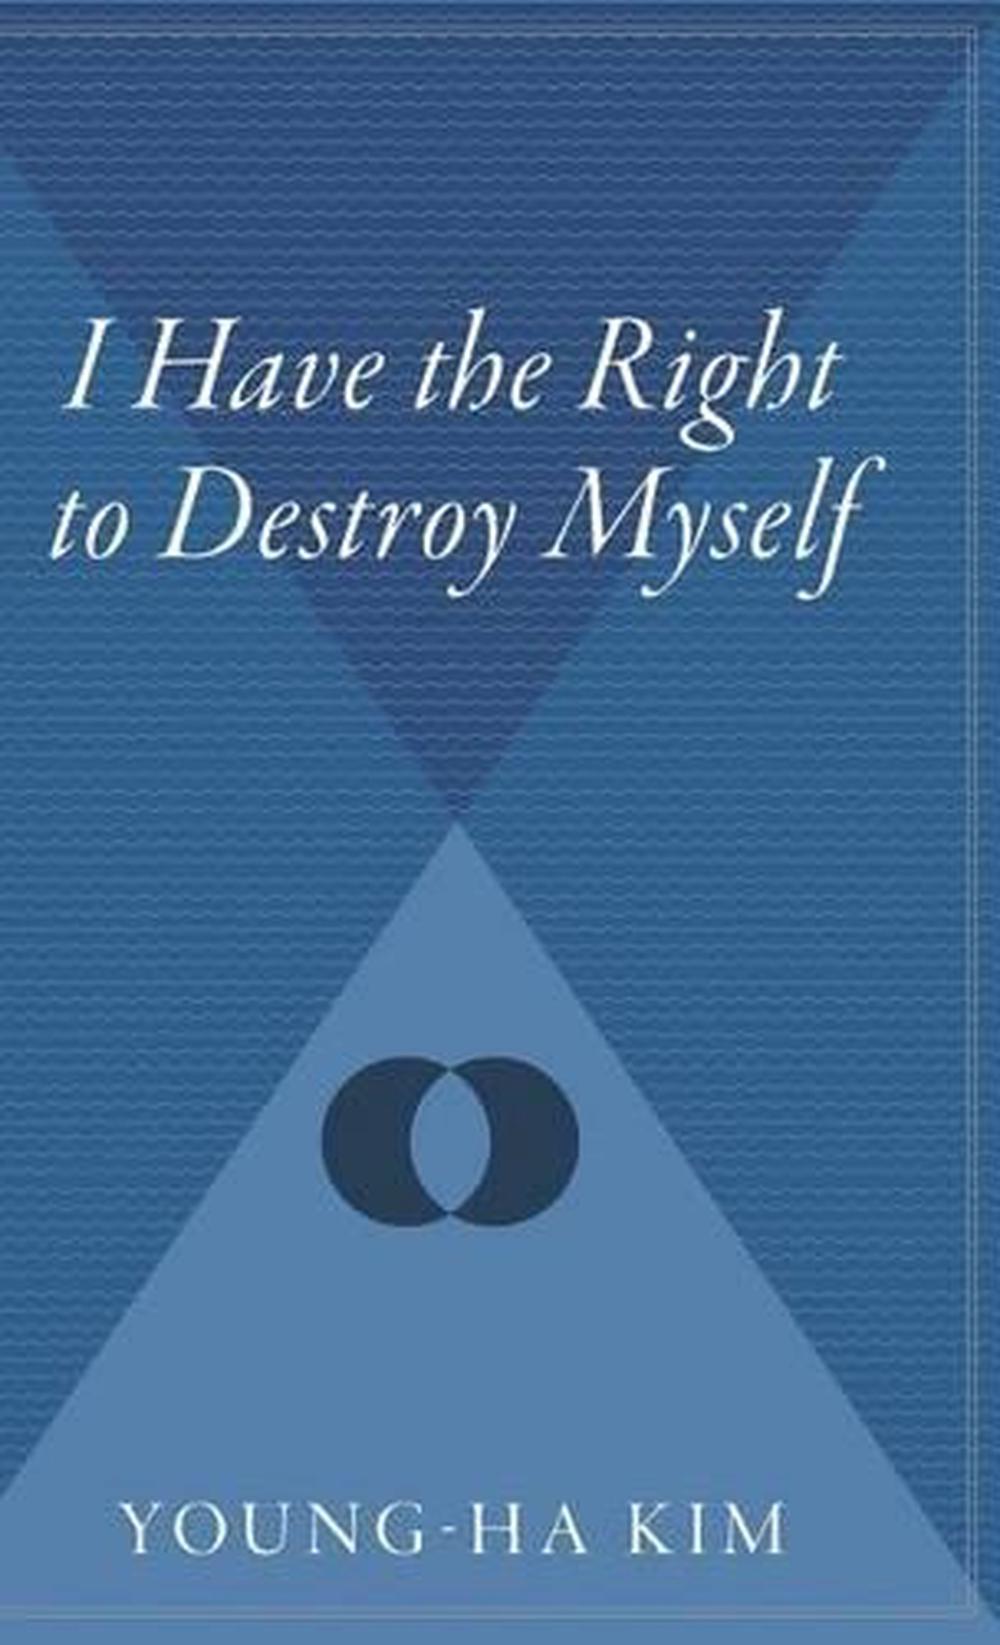 I Have the Right to Destroy Myself by YoungHa Kim (English) Hardcover Book Free 9780544310605